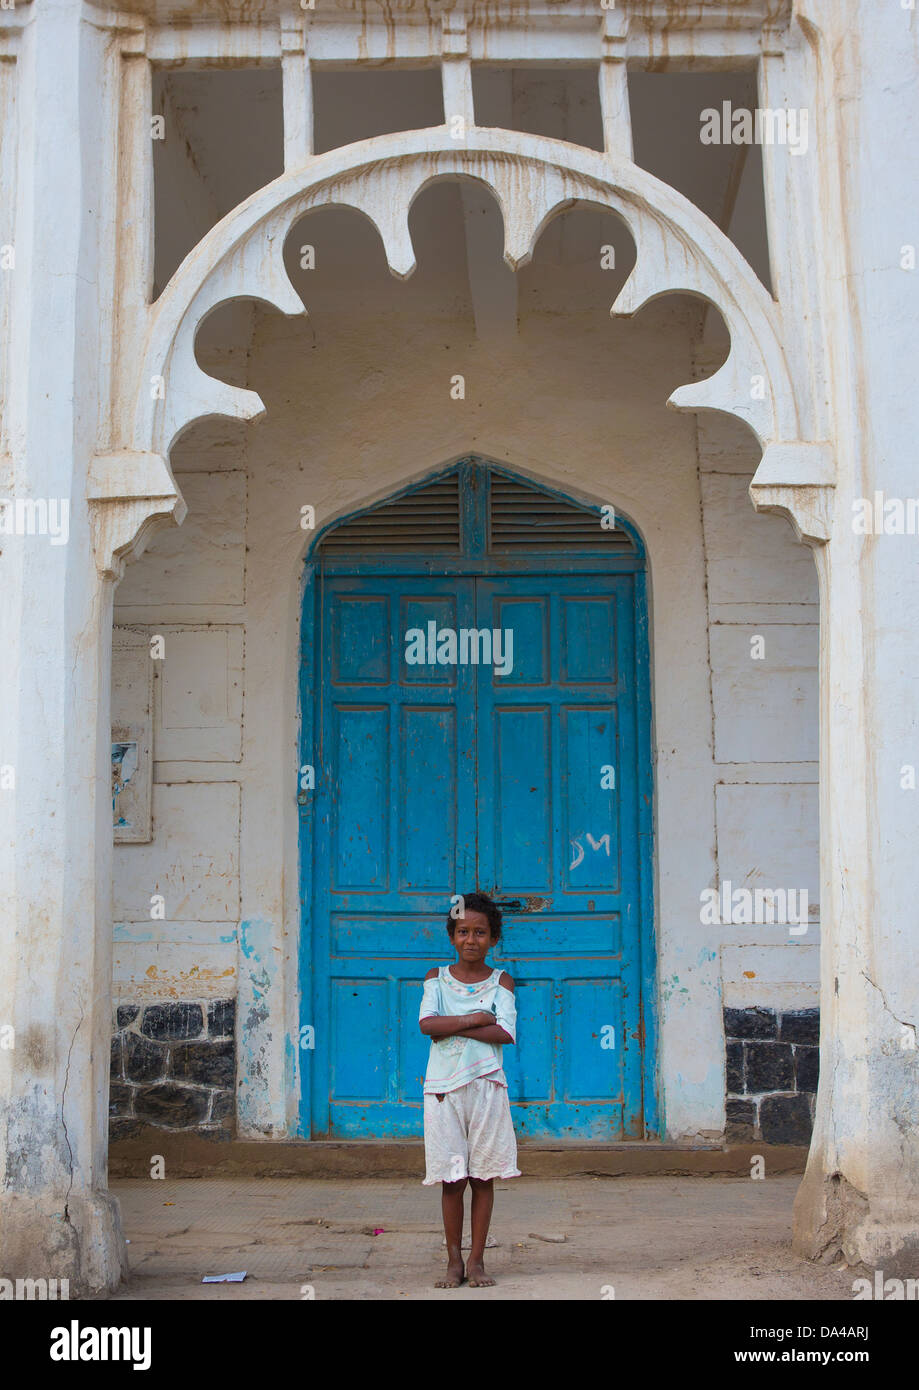 Child Standing In Front Of An Ottoman Architecture Building, Massawa, Eritrea Stock Photo